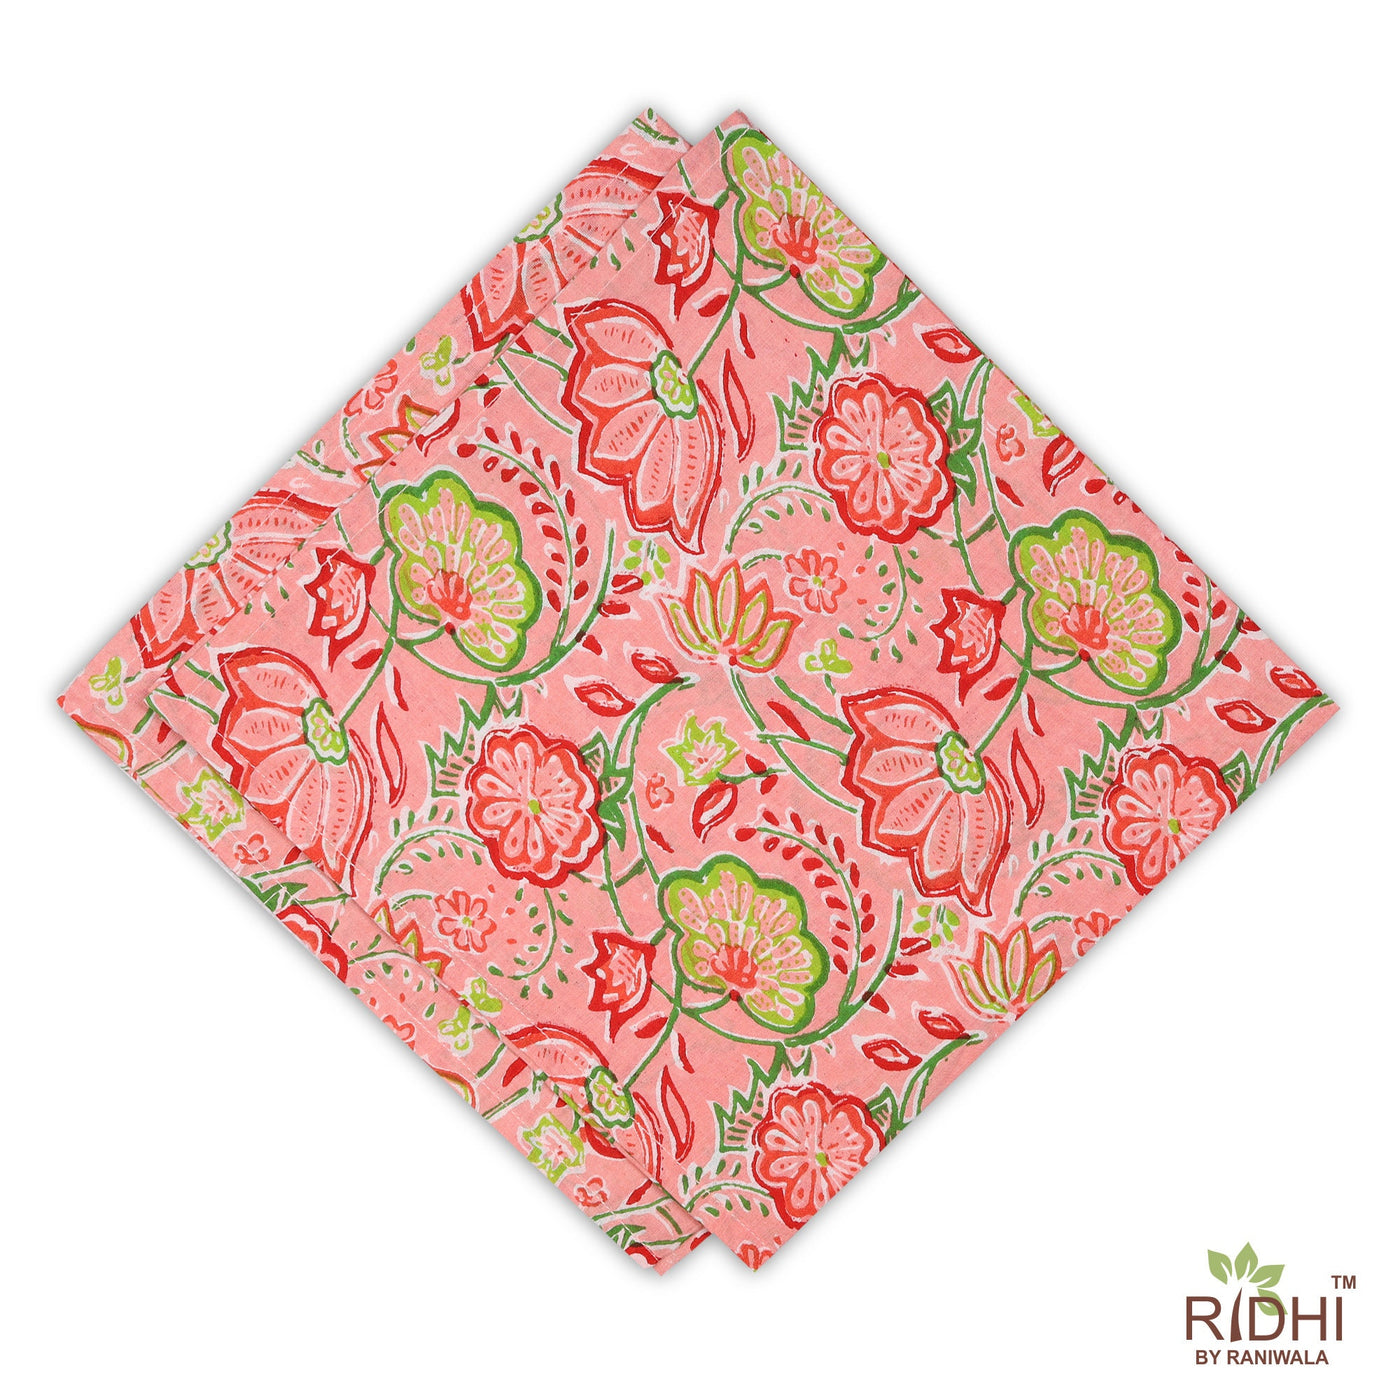 Coral Pink, Forest and Kelly Green Indian Floral Printed Pure Cotton Napkins, Wedding Decor, 18x18"- Cocktail Napkins, 20x20"- Dinner Napkins